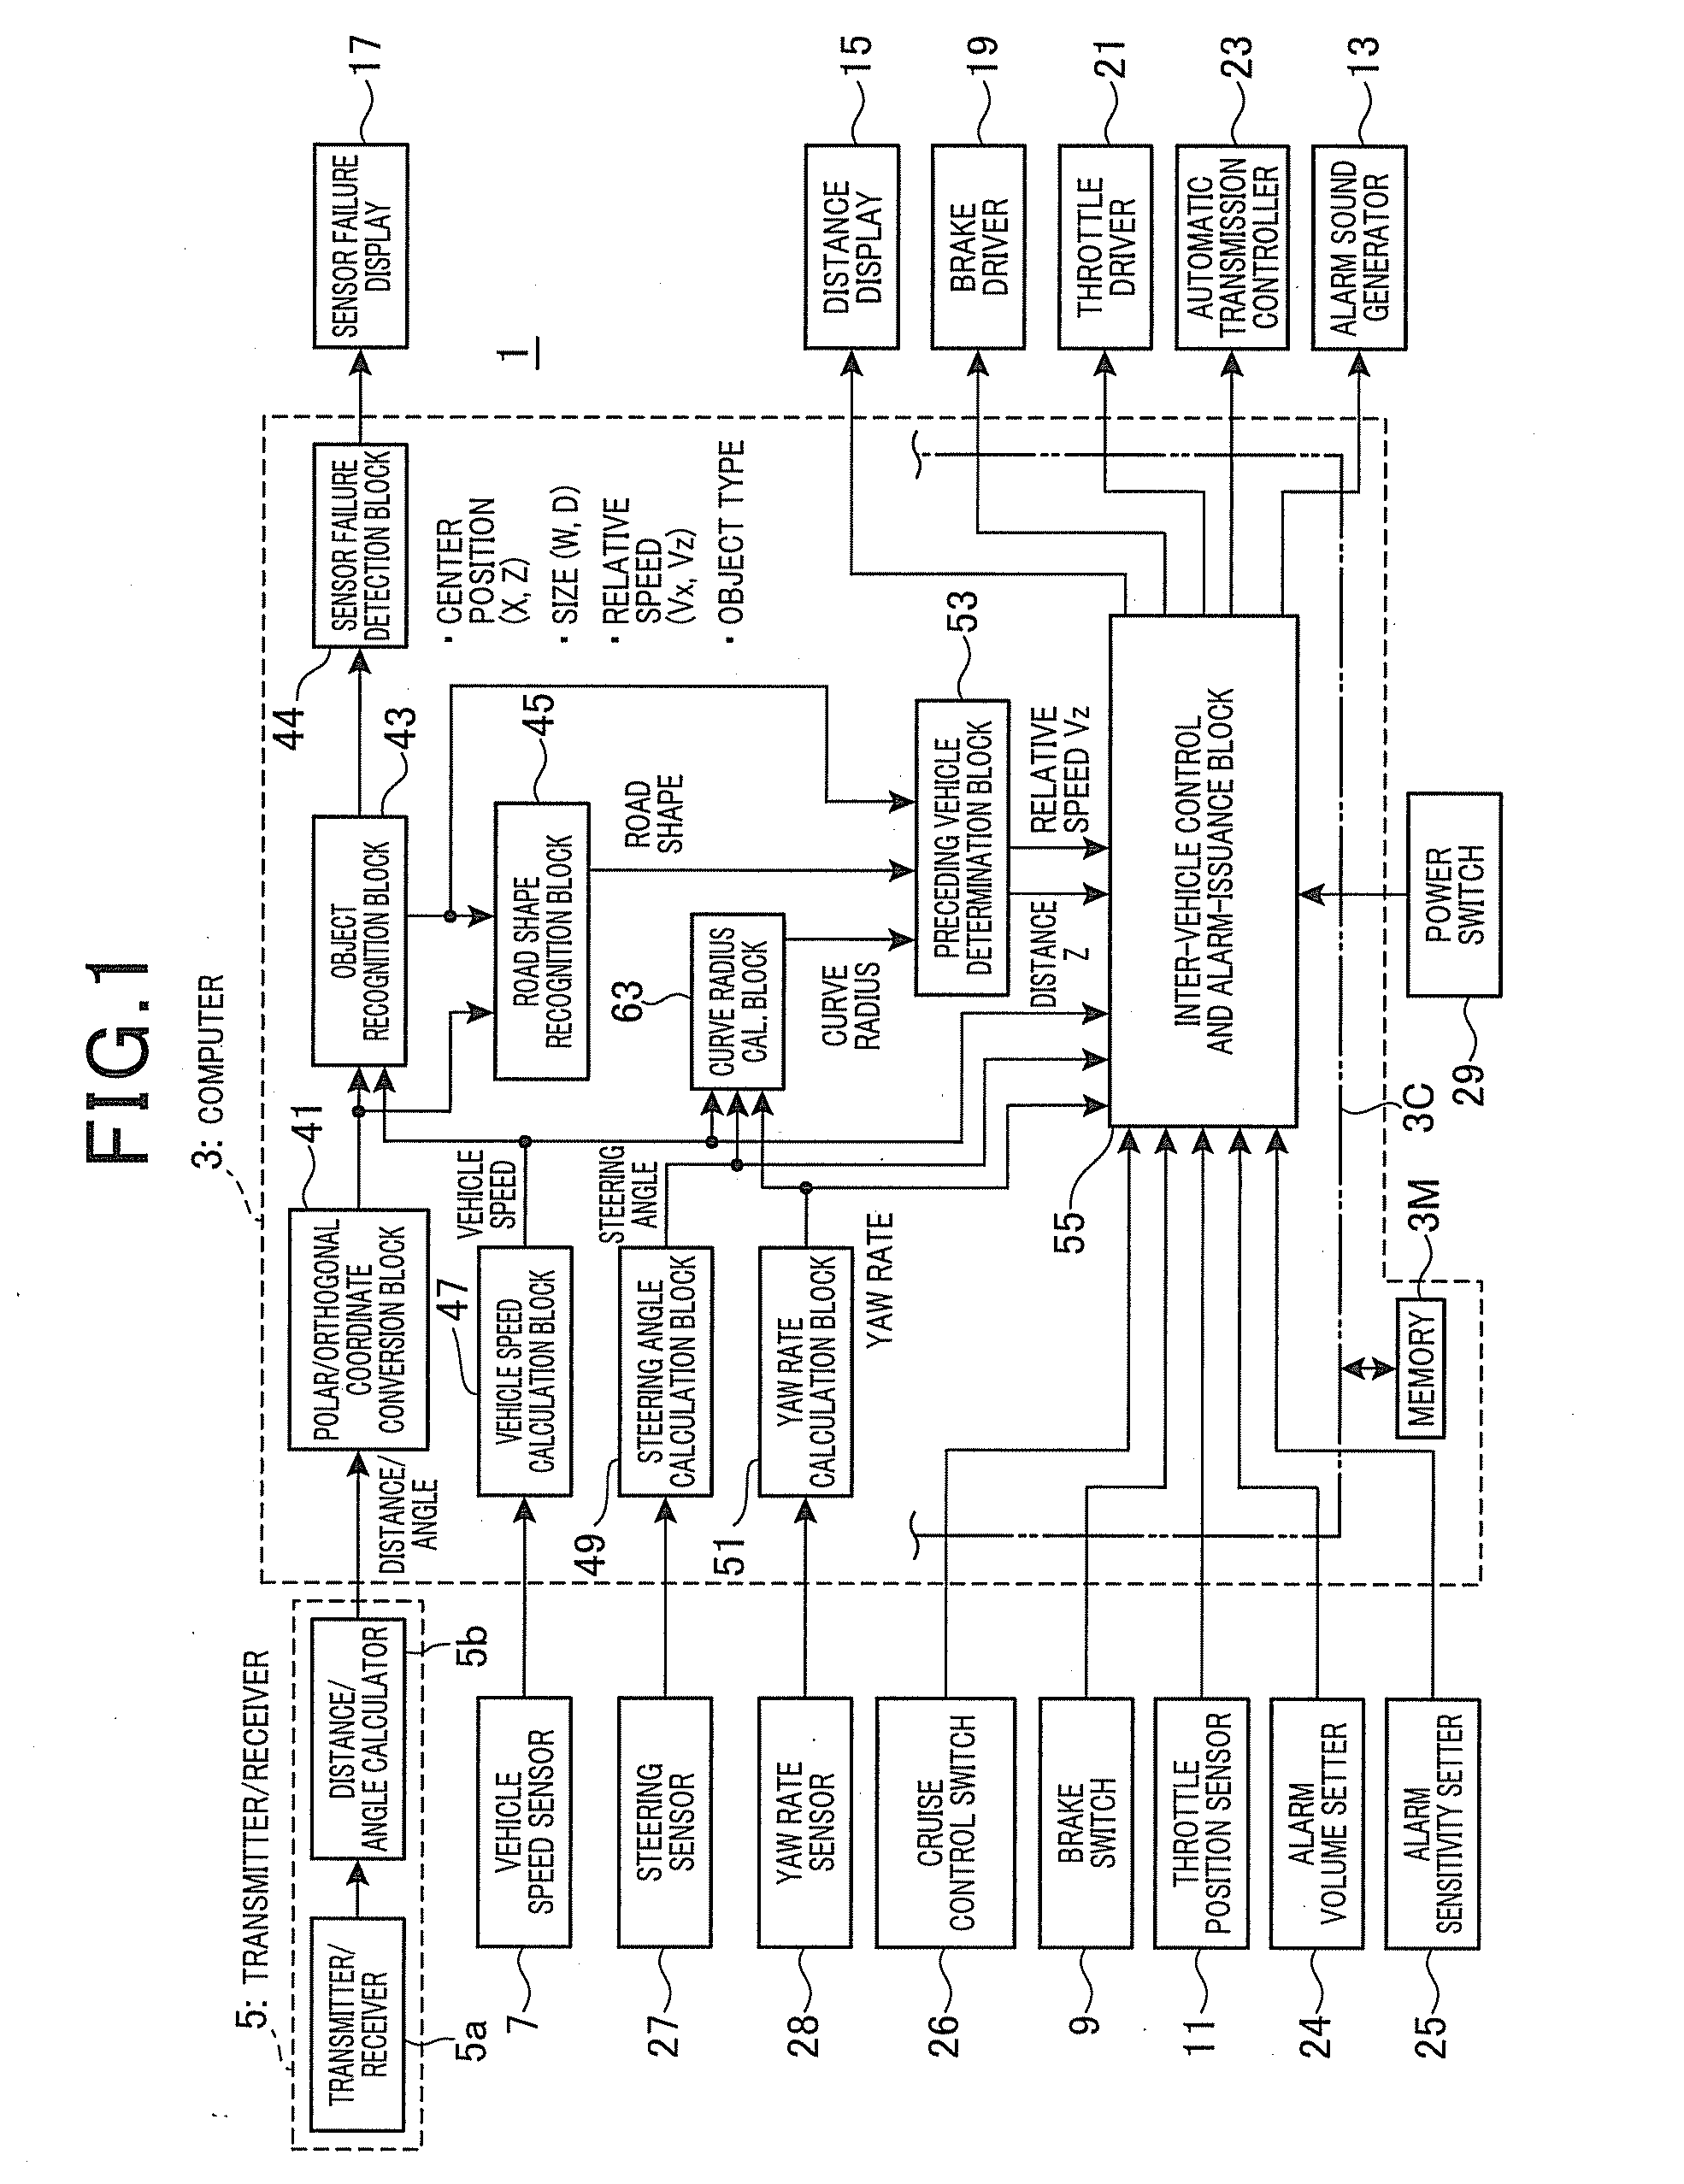 Method and apparatus for recognizing shape of road for vehicles